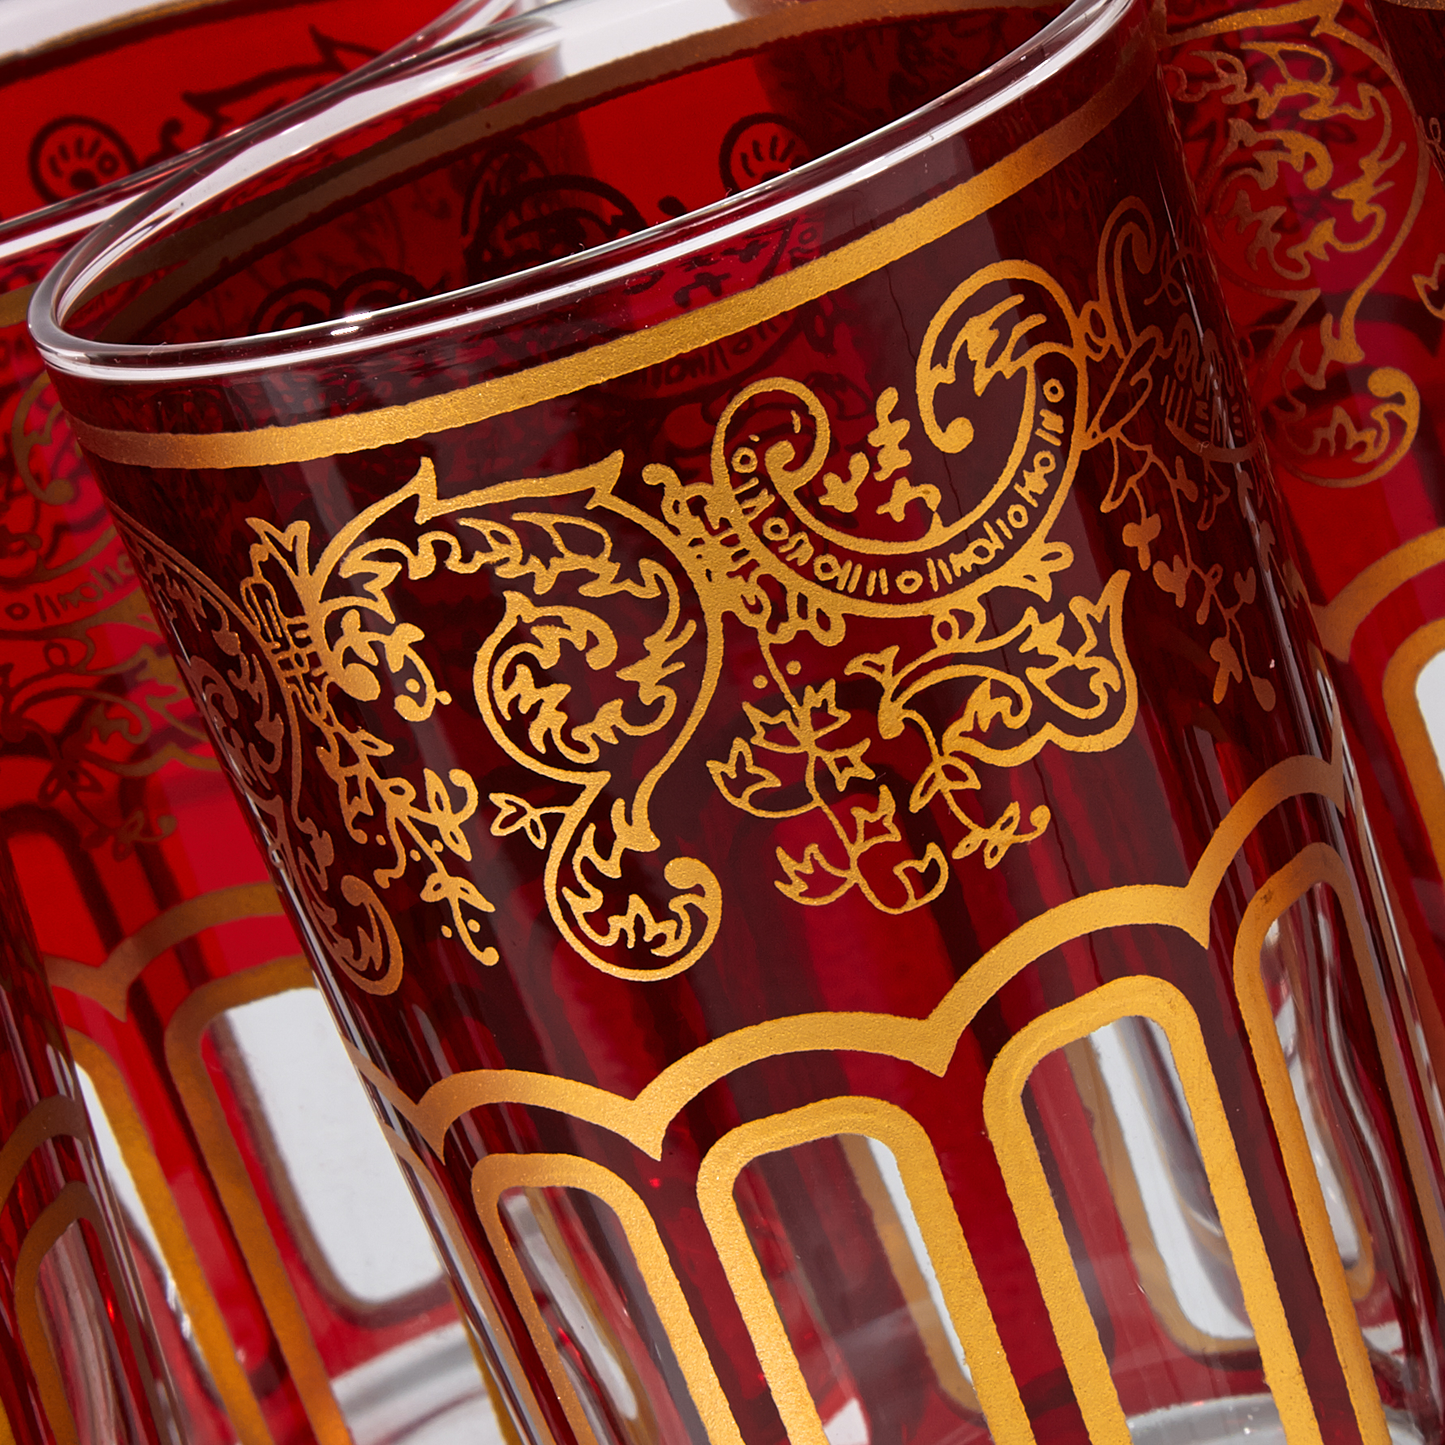 Moroccan Tea Glasses Red & Gold Beautiful Classical Design Hand Painted Hand Decorated (Pack of 6)